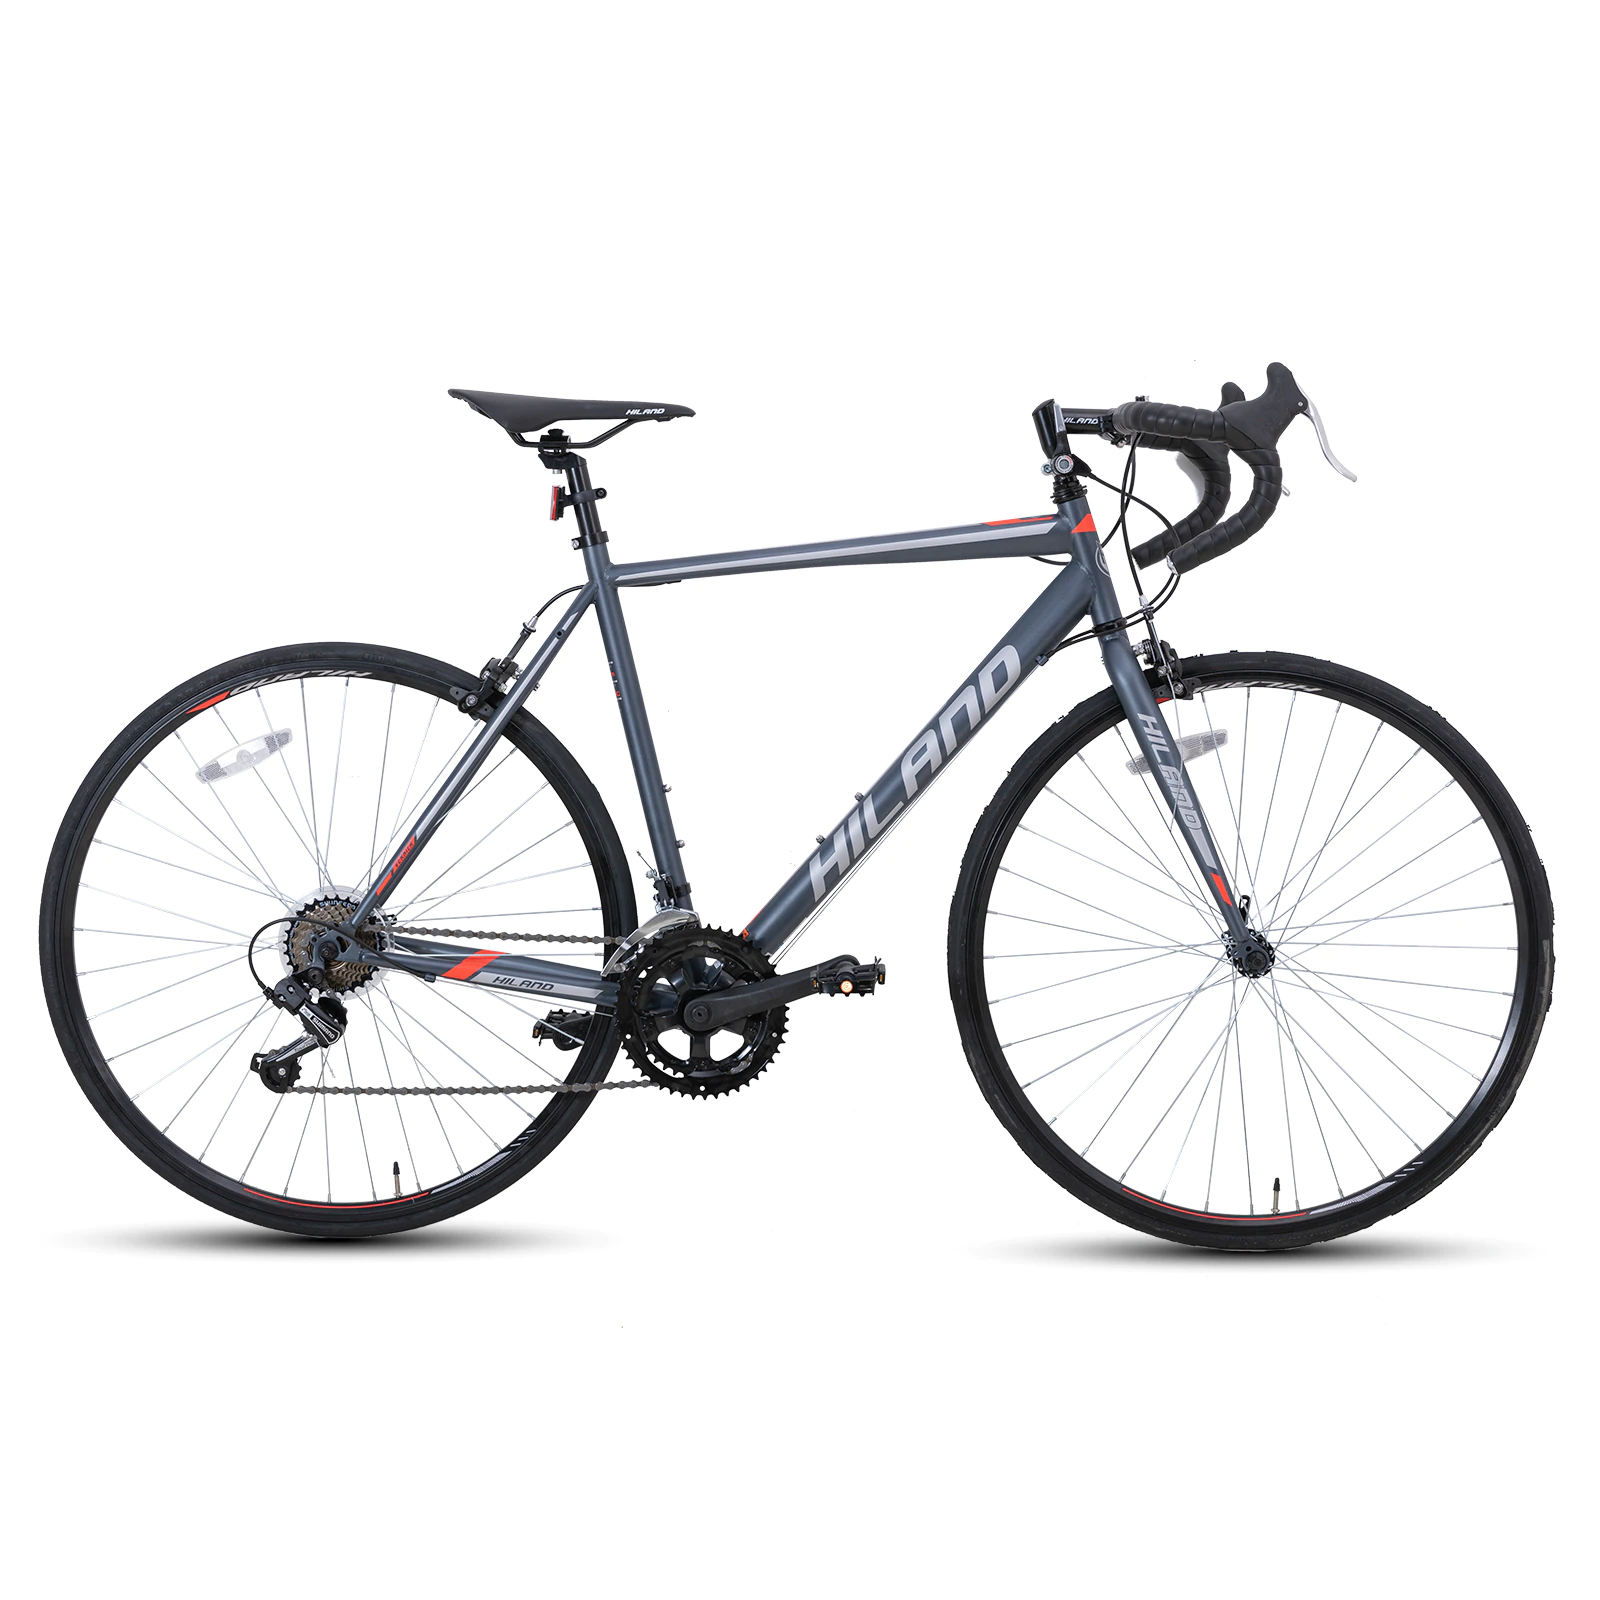 Hiland Road Bike 700C Racing Bicycle with Shimano14 Speeds 3 Colors 